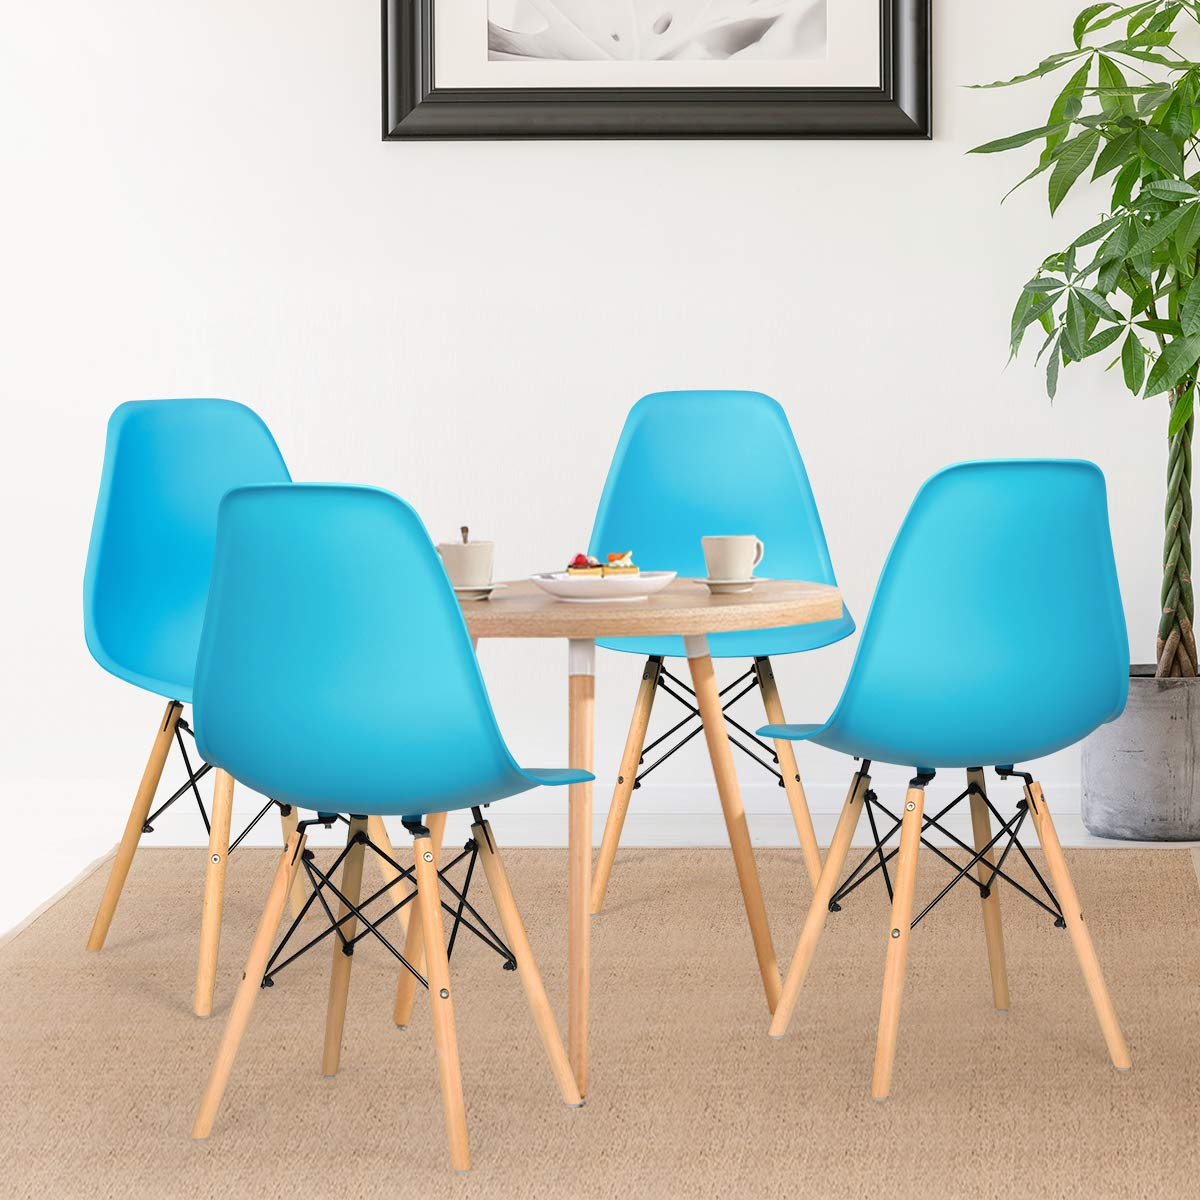 Giantex Dining DSW Chairs with Linen Cushion, Modern Mid Century Shell Chairs w/ Wood Legs